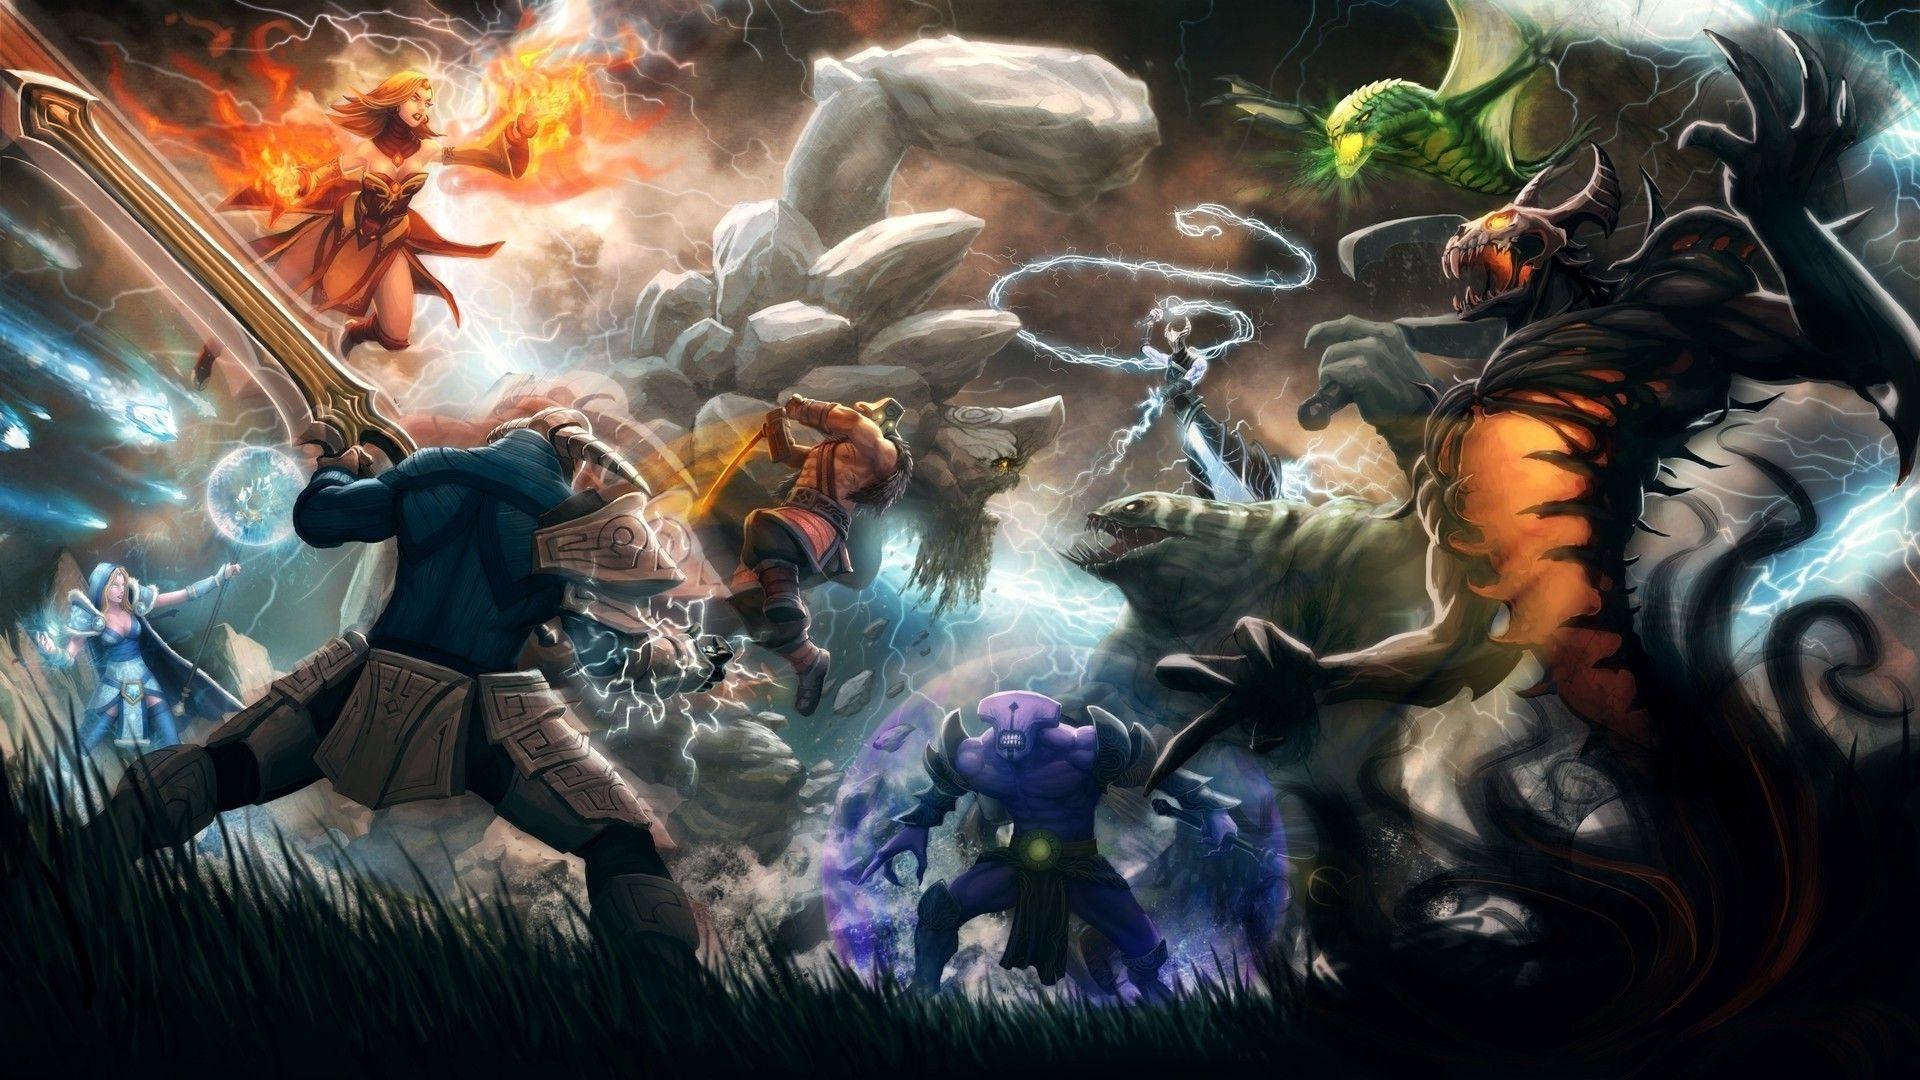 The Best Dota 2 Backgrounds for Your PC in 2023  DMarket  Blog